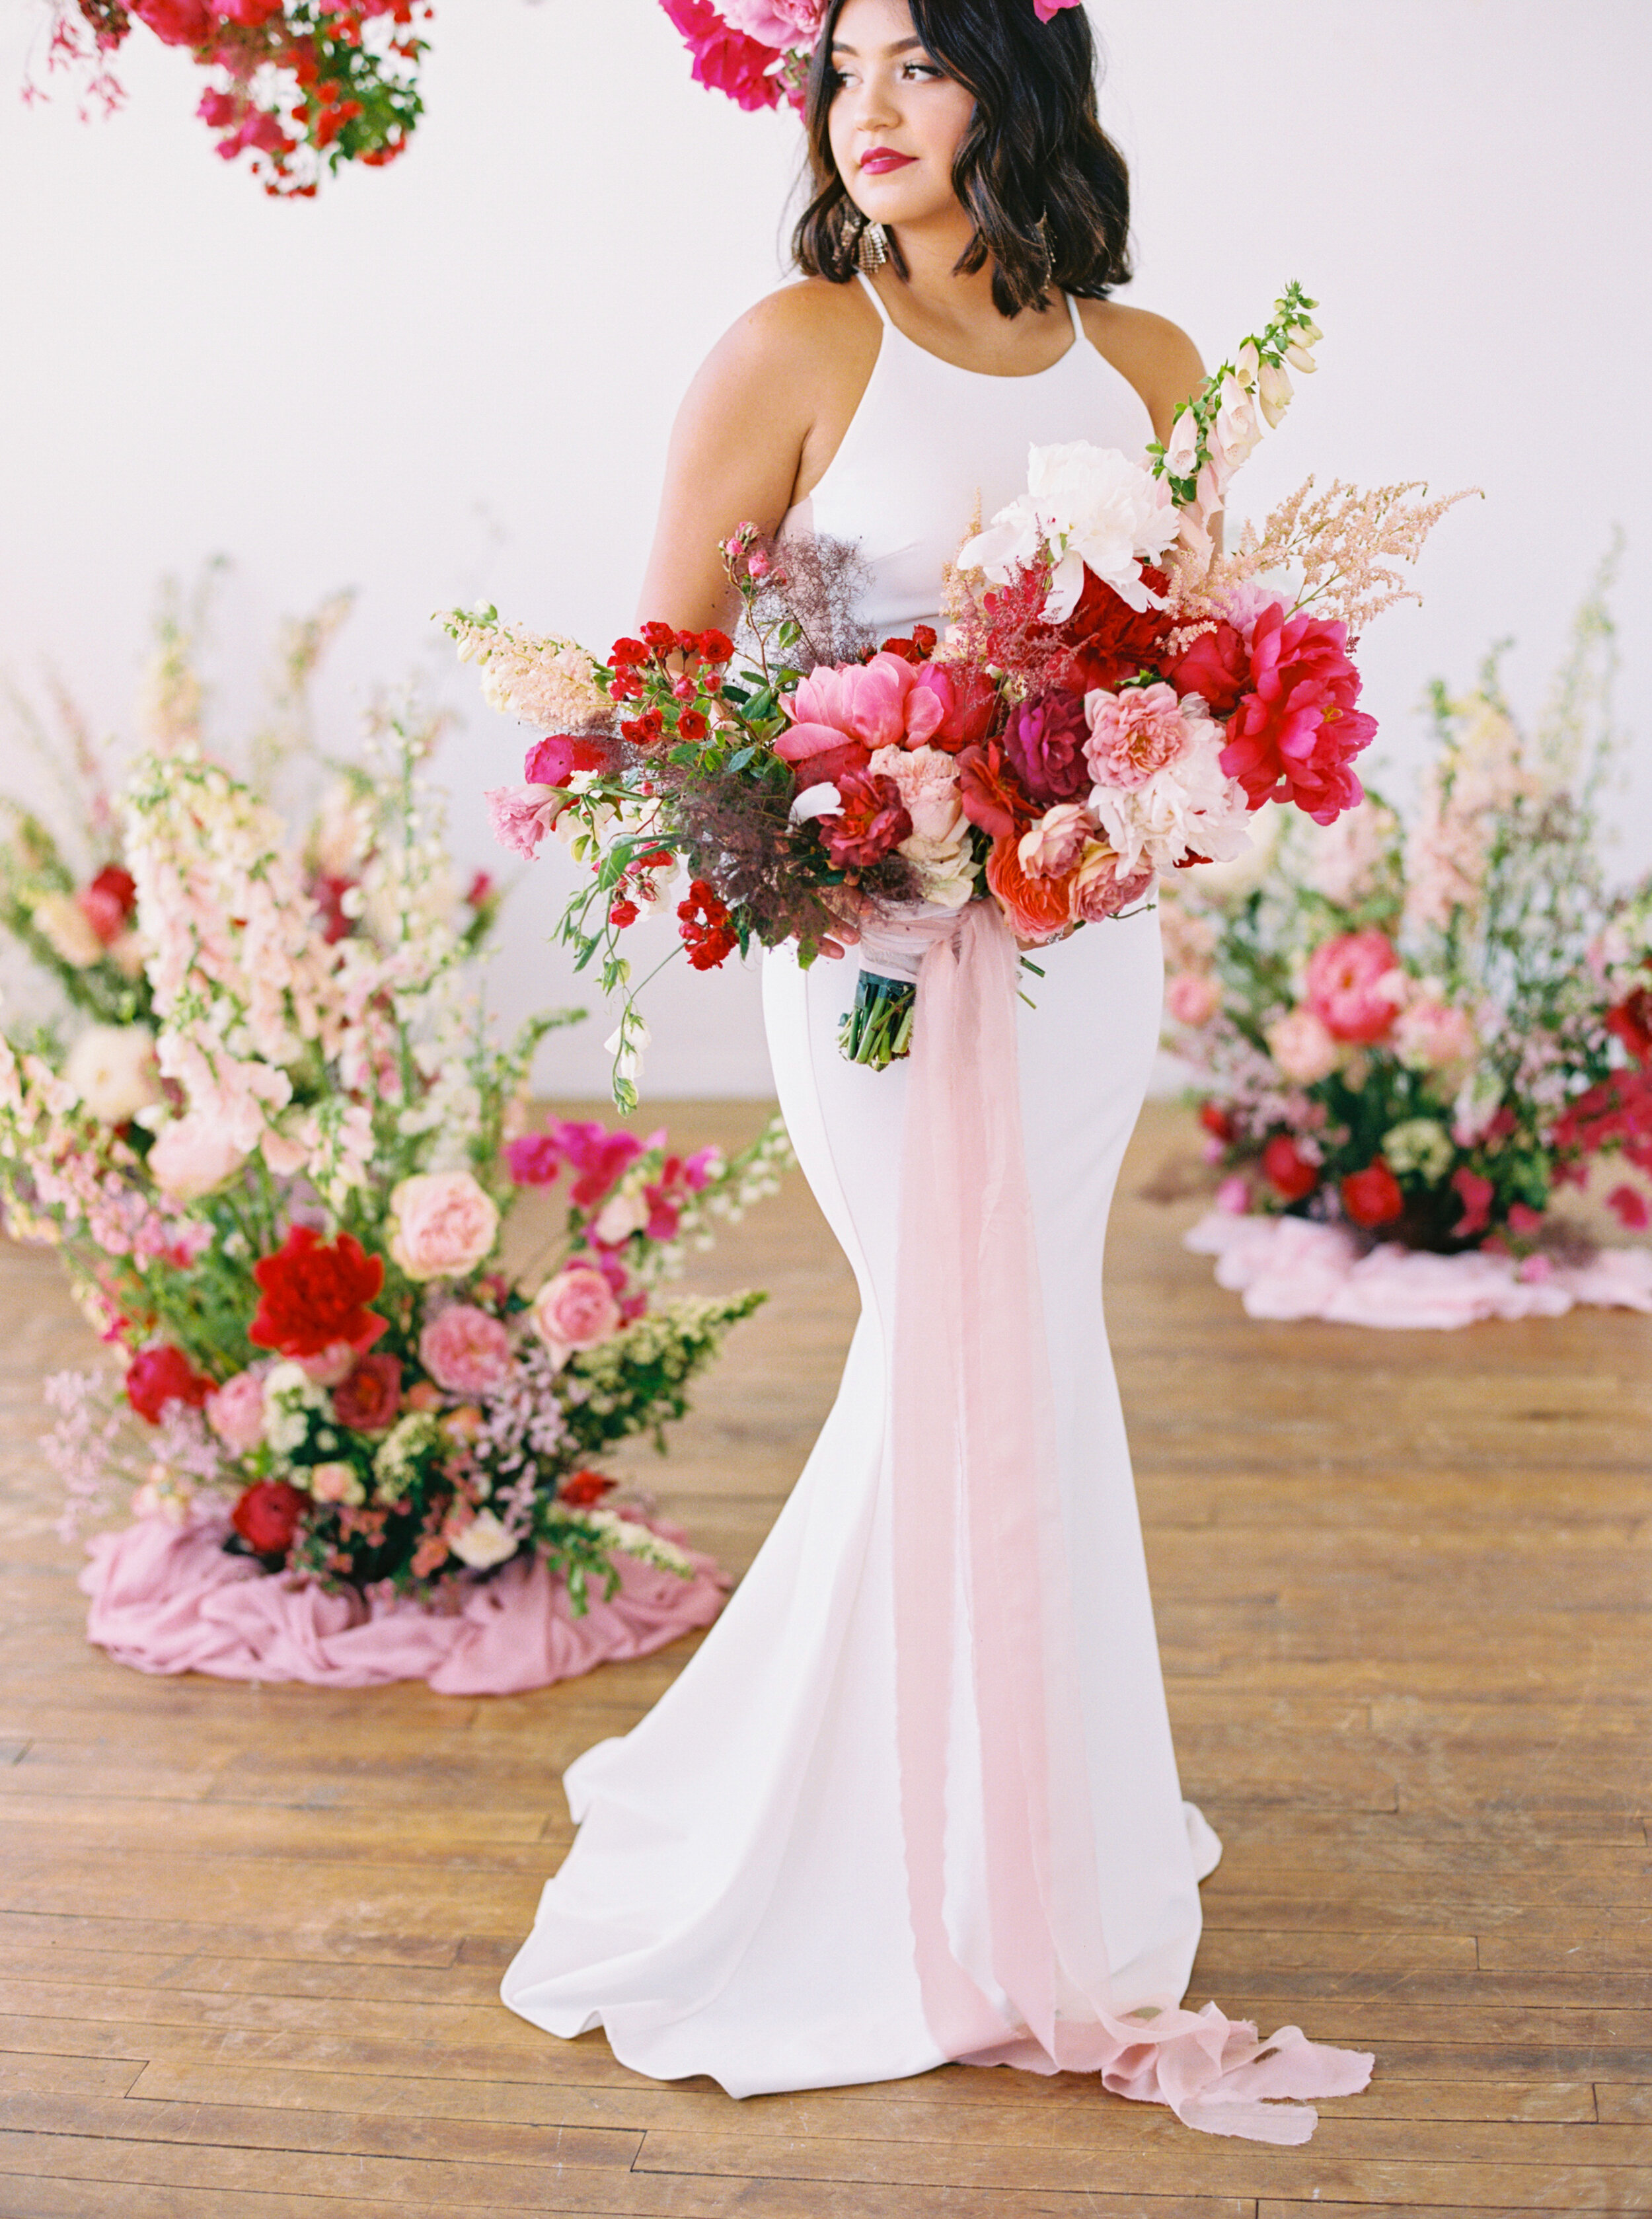 A Romantic Wedding Elopement Filled with Colorful Fuchsia - Sarahi Hadden Submission-113.jpg